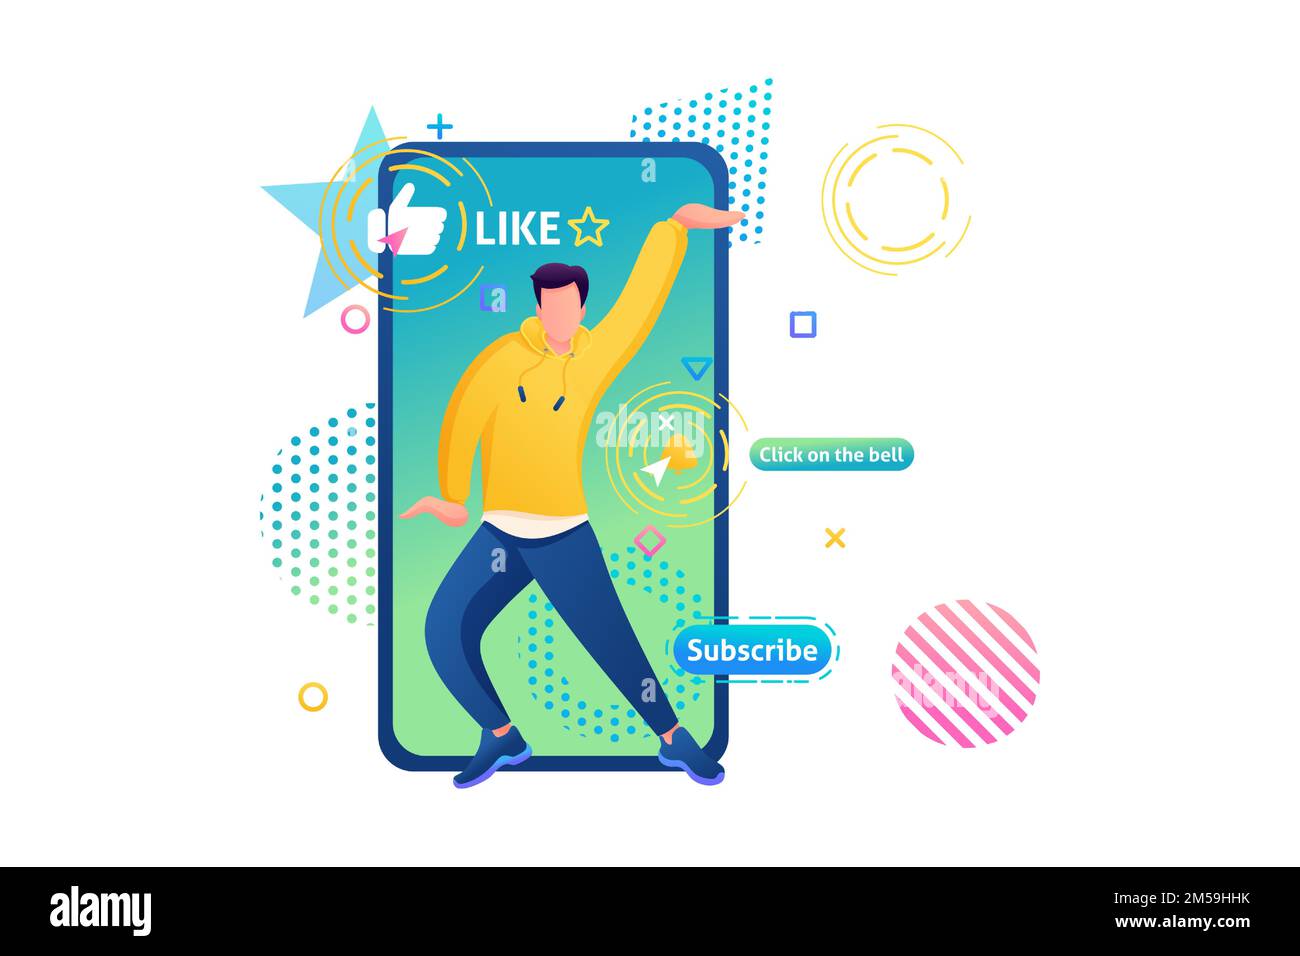 Channel about the dance of a Young guy, Tectonics, freestyle, R & B. Web design for dance training. Subscribe and learn to dance. Stock Vector